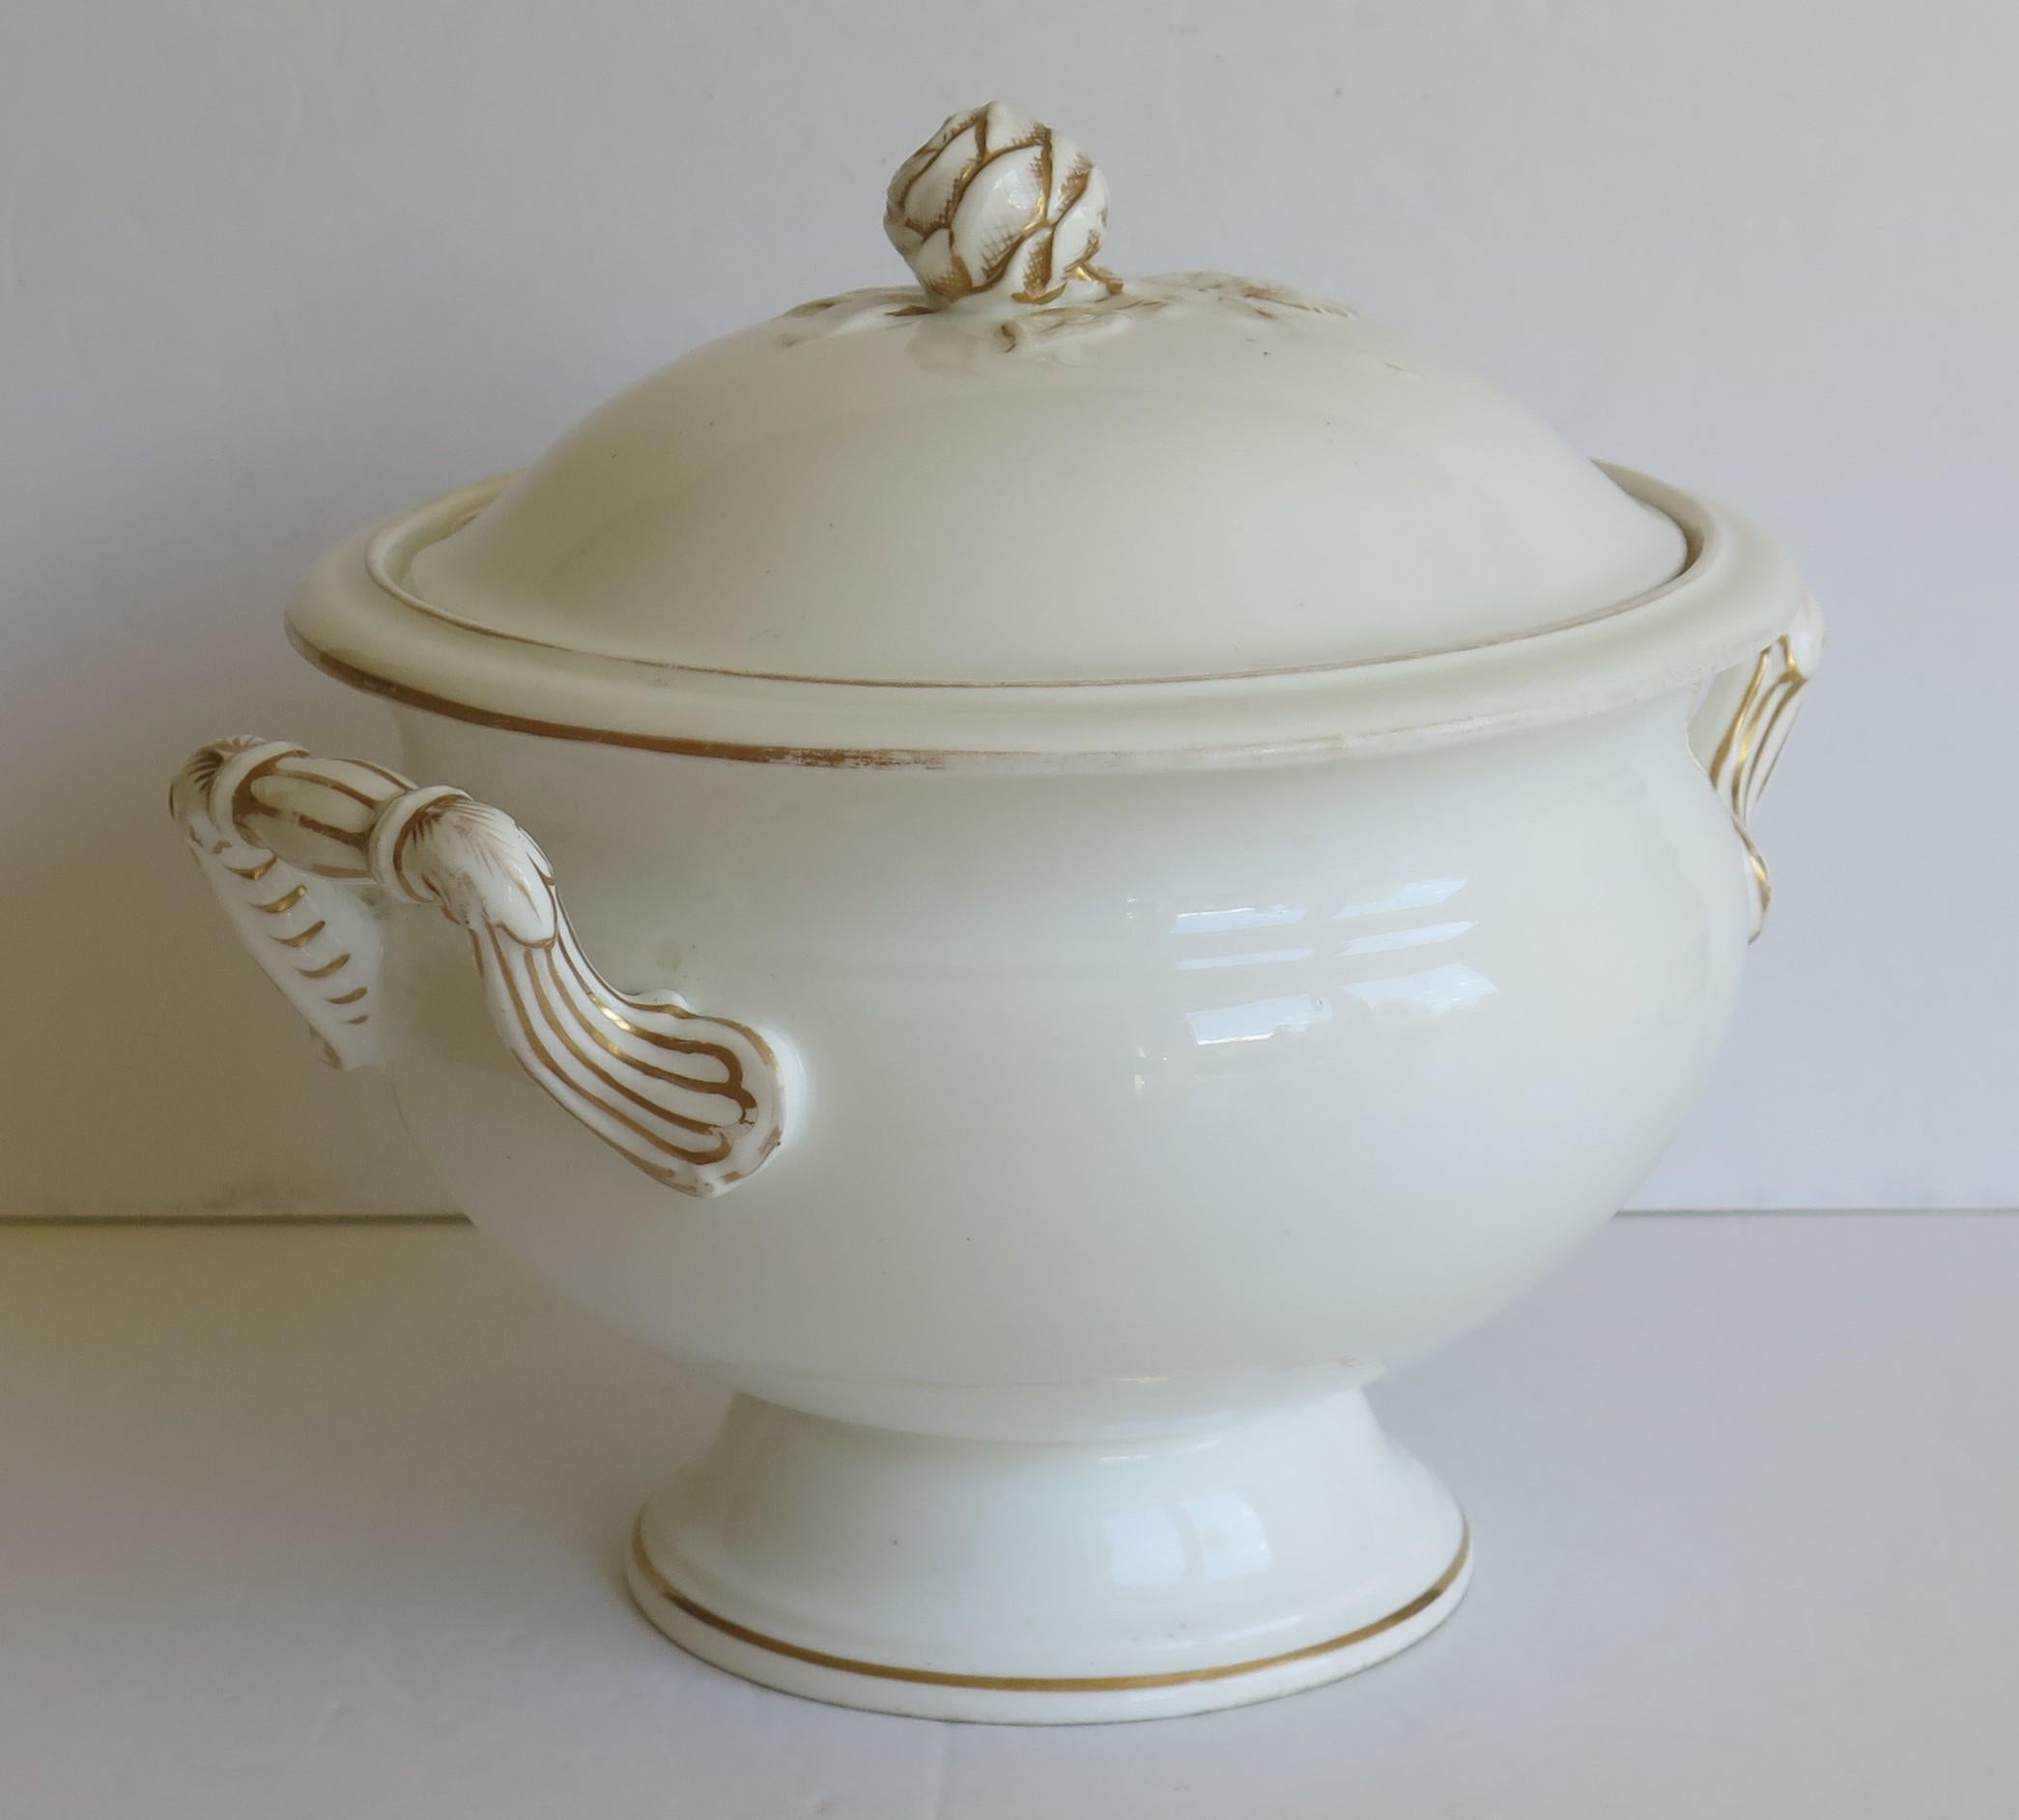 Large 19th Century Porcelain Tureen Gilded Moulded Handles & Rose Knop to Lid In Good Condition For Sale In Lincoln, Lincolnshire